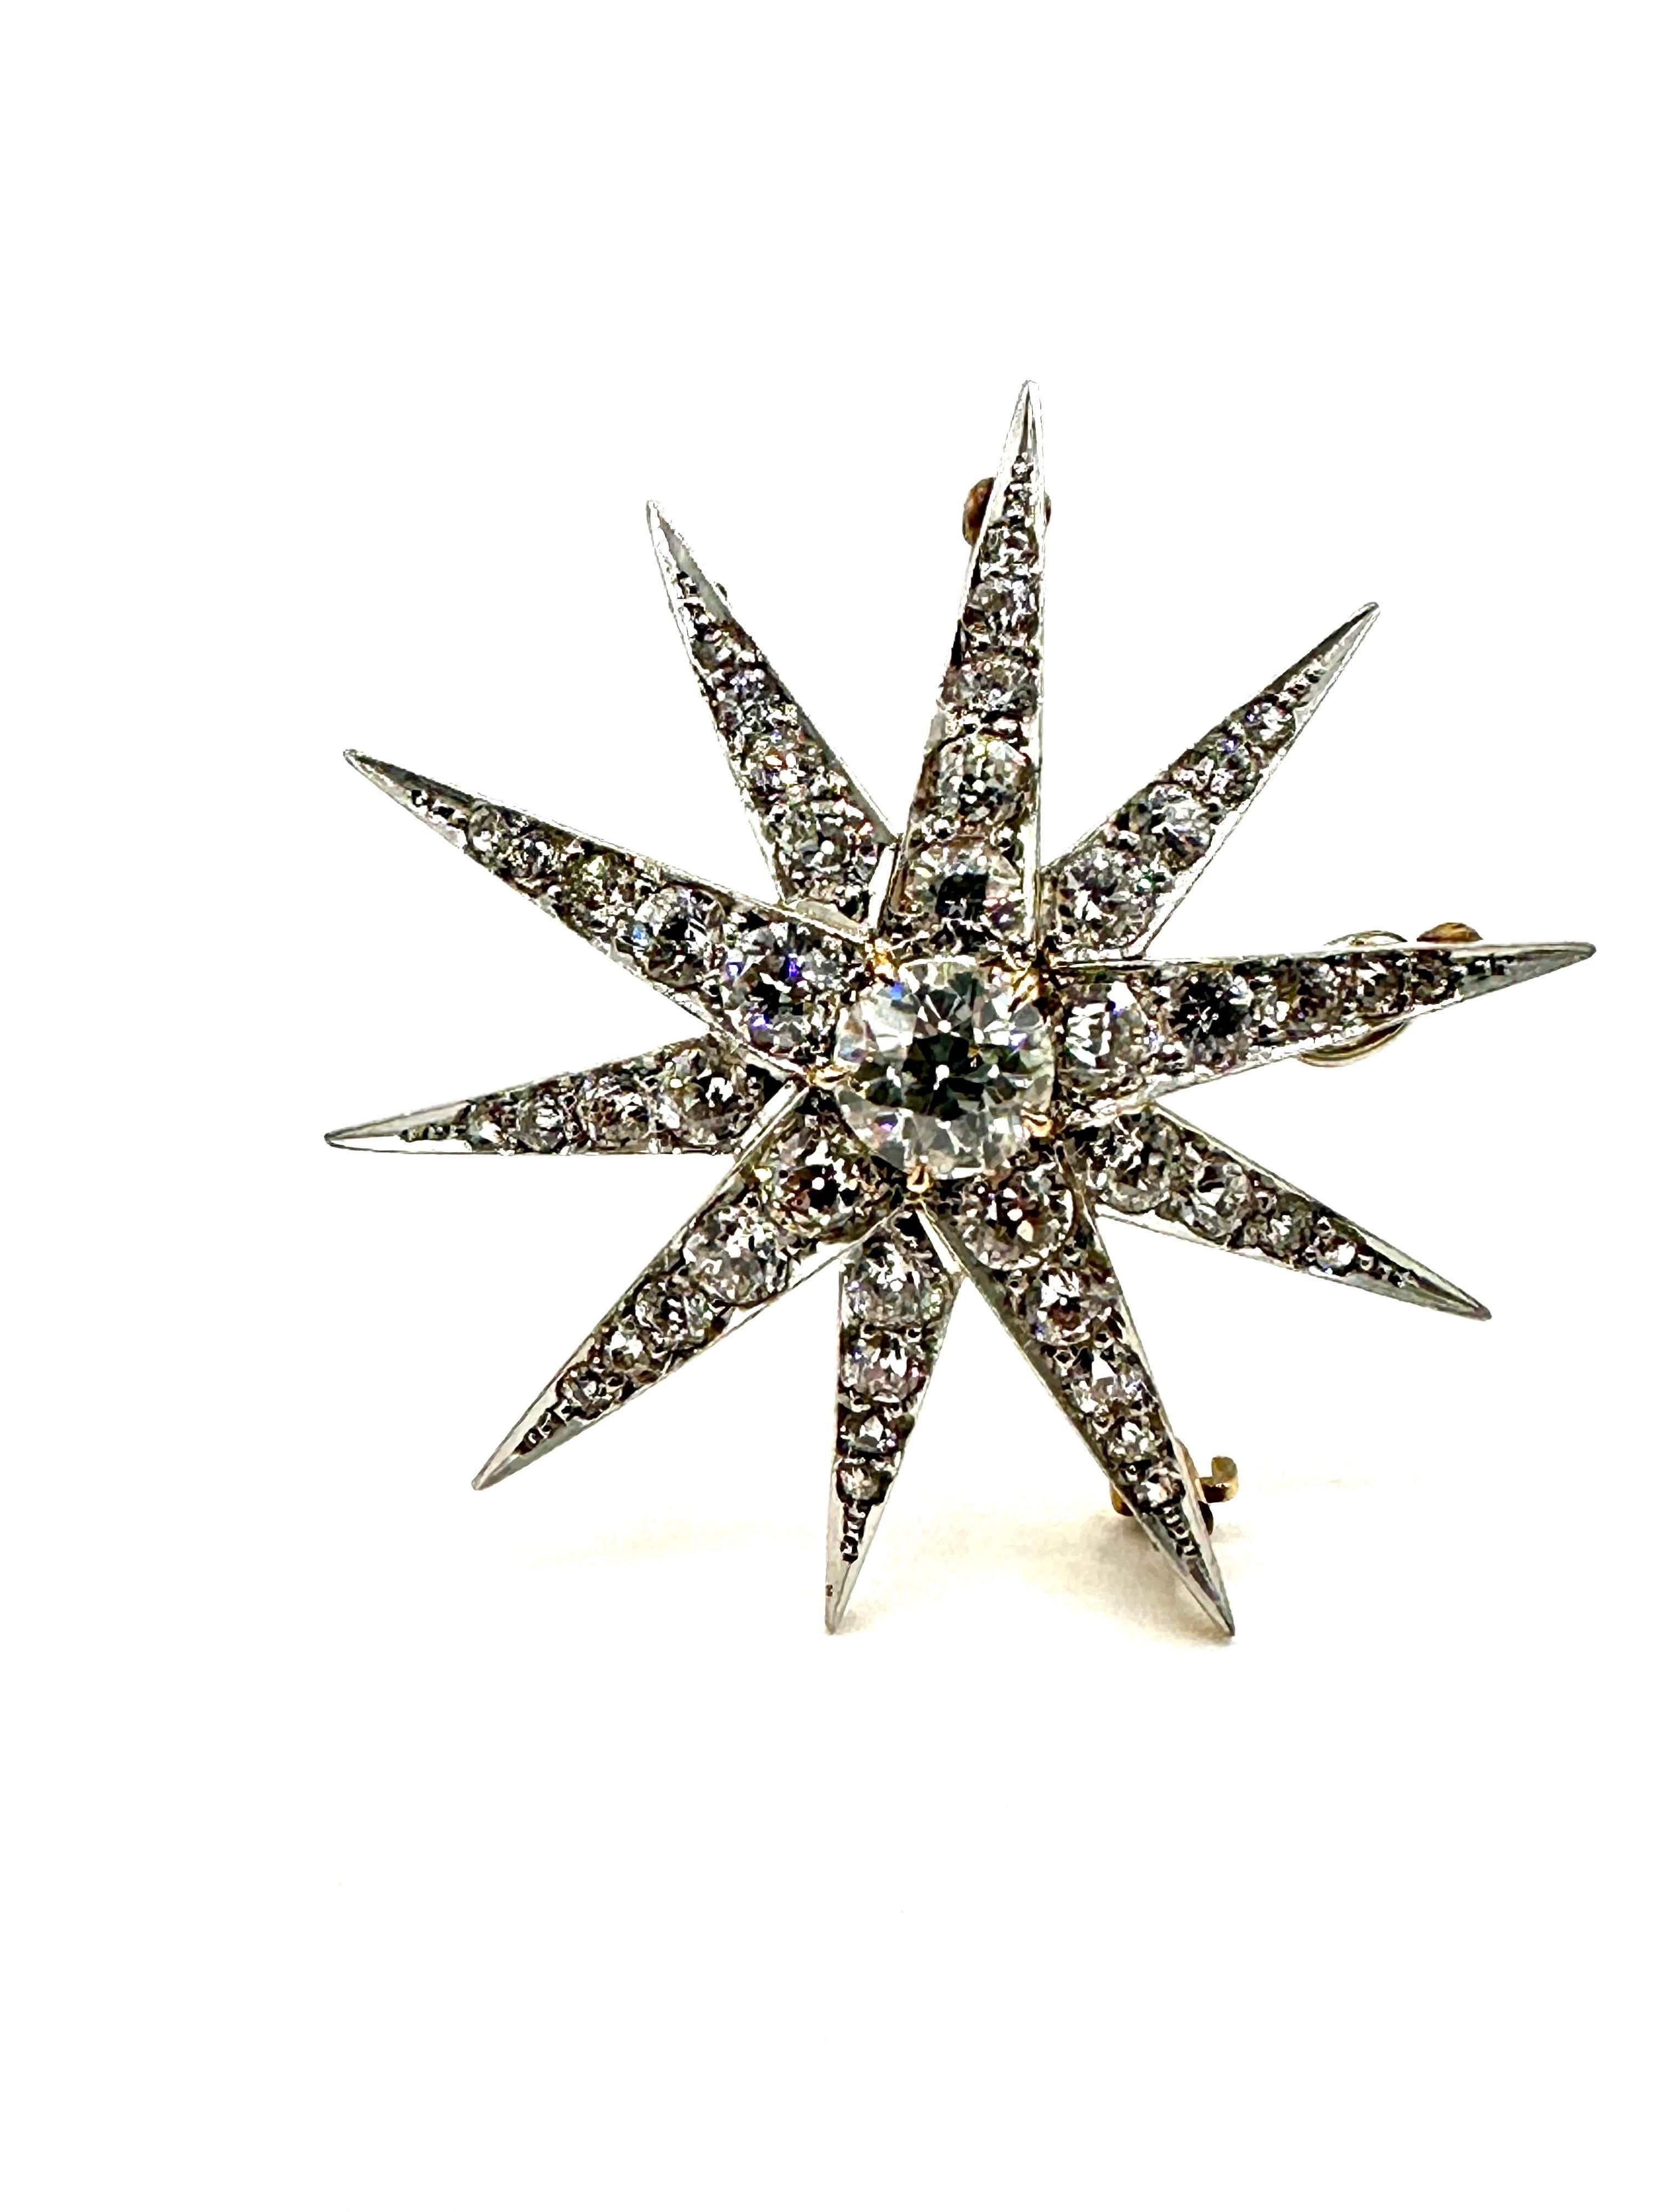 This is an incredibly vibrant old European cut Diamond pendant brooch.  The piece is et with a single 1.20 carat old European cut Diamond center, graded as J color, VS clarity.  This is surrounded by 10 starbursts extending outward, containing 4.40